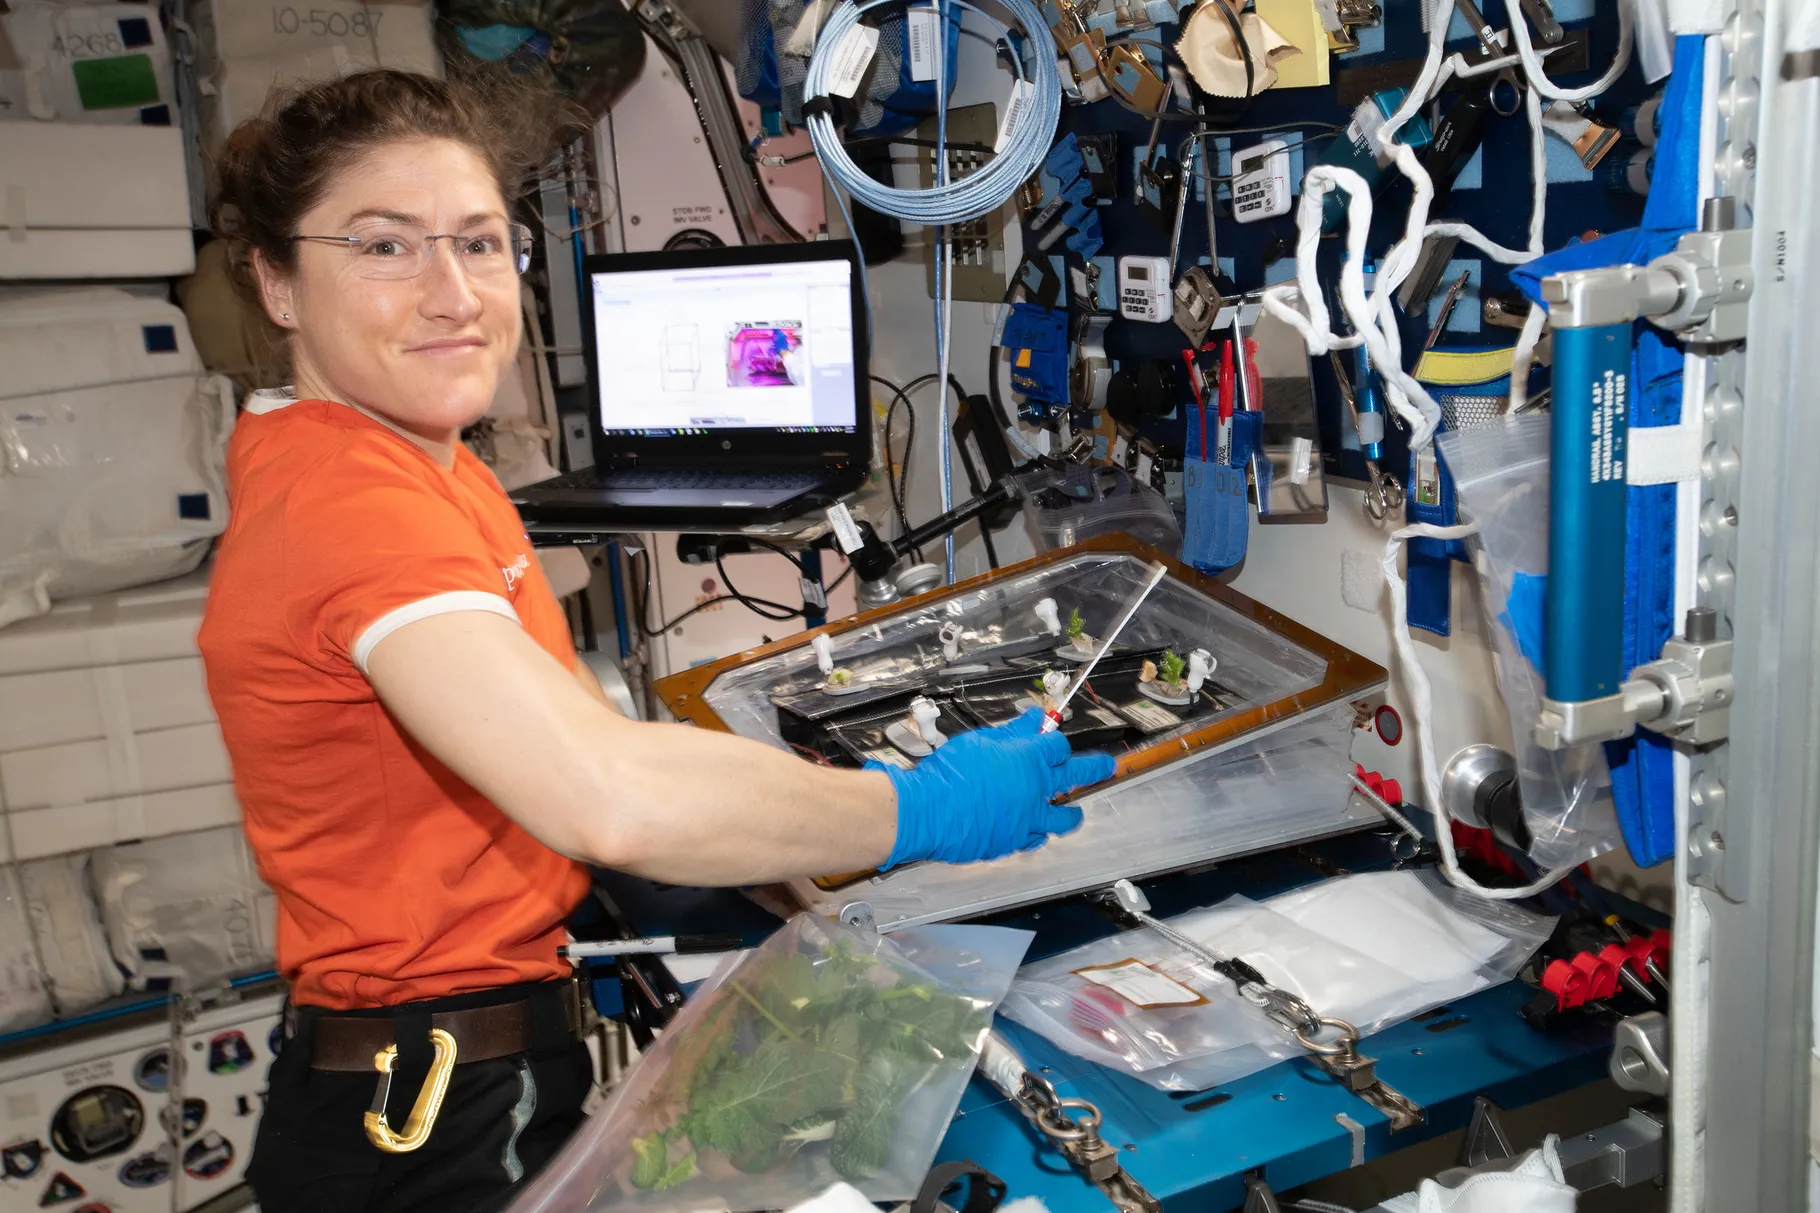 Astronaut Christina Koch aims for record-setting 328 days in space